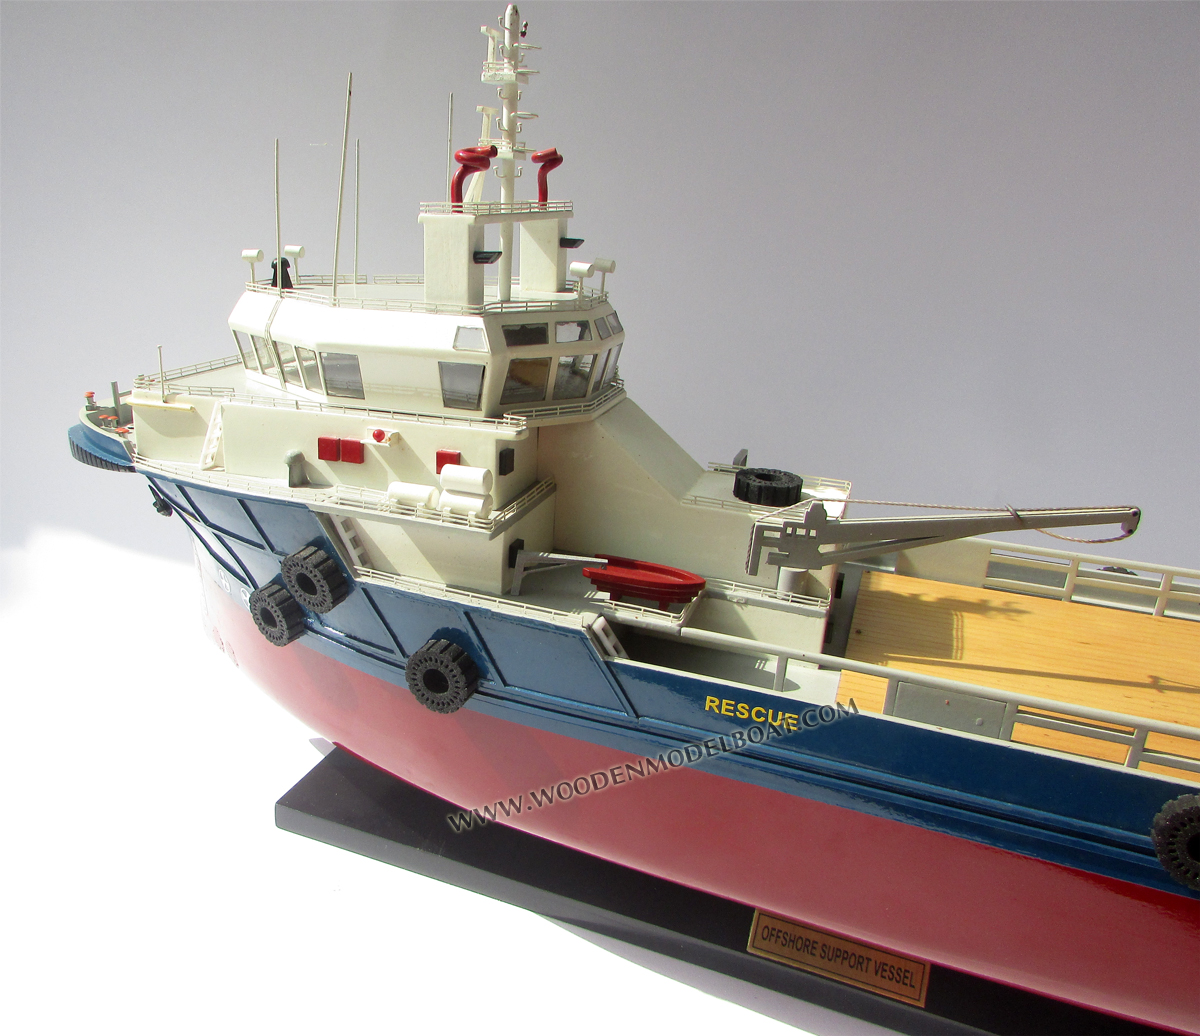 Model Offshore Support Vessel Deck View, offshore support vessel model, OSV model, display offshore support vessel, tugboat model, model tug boat, tugboat model, display tugboat model, scale tugboat model, offshore vessel model, model boat offshore support vessel, handmade sea tugboat vessel